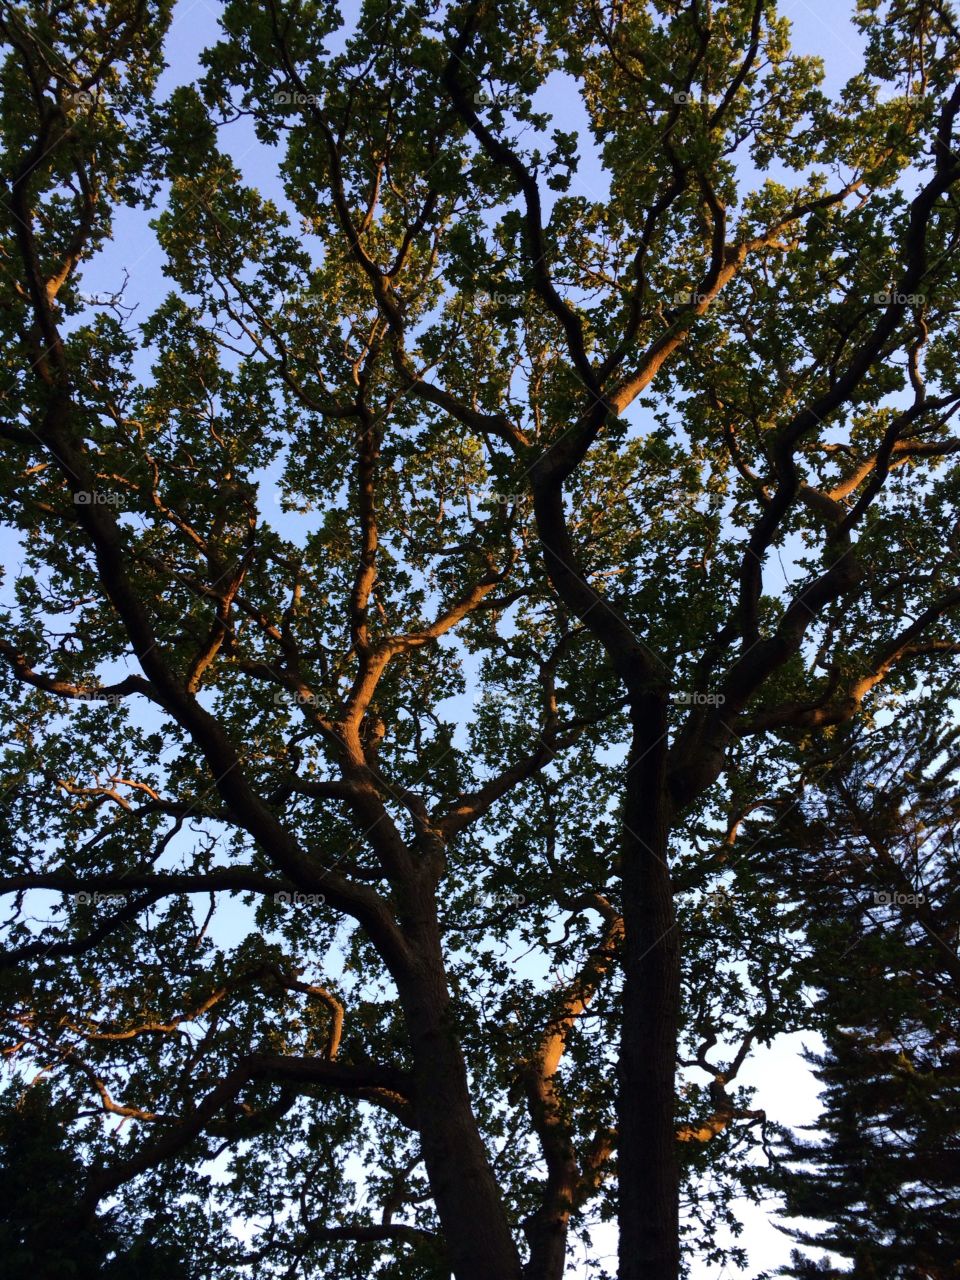 Summer Evening Trees. Walking home past trees I always see, but had never seen them like this before. 